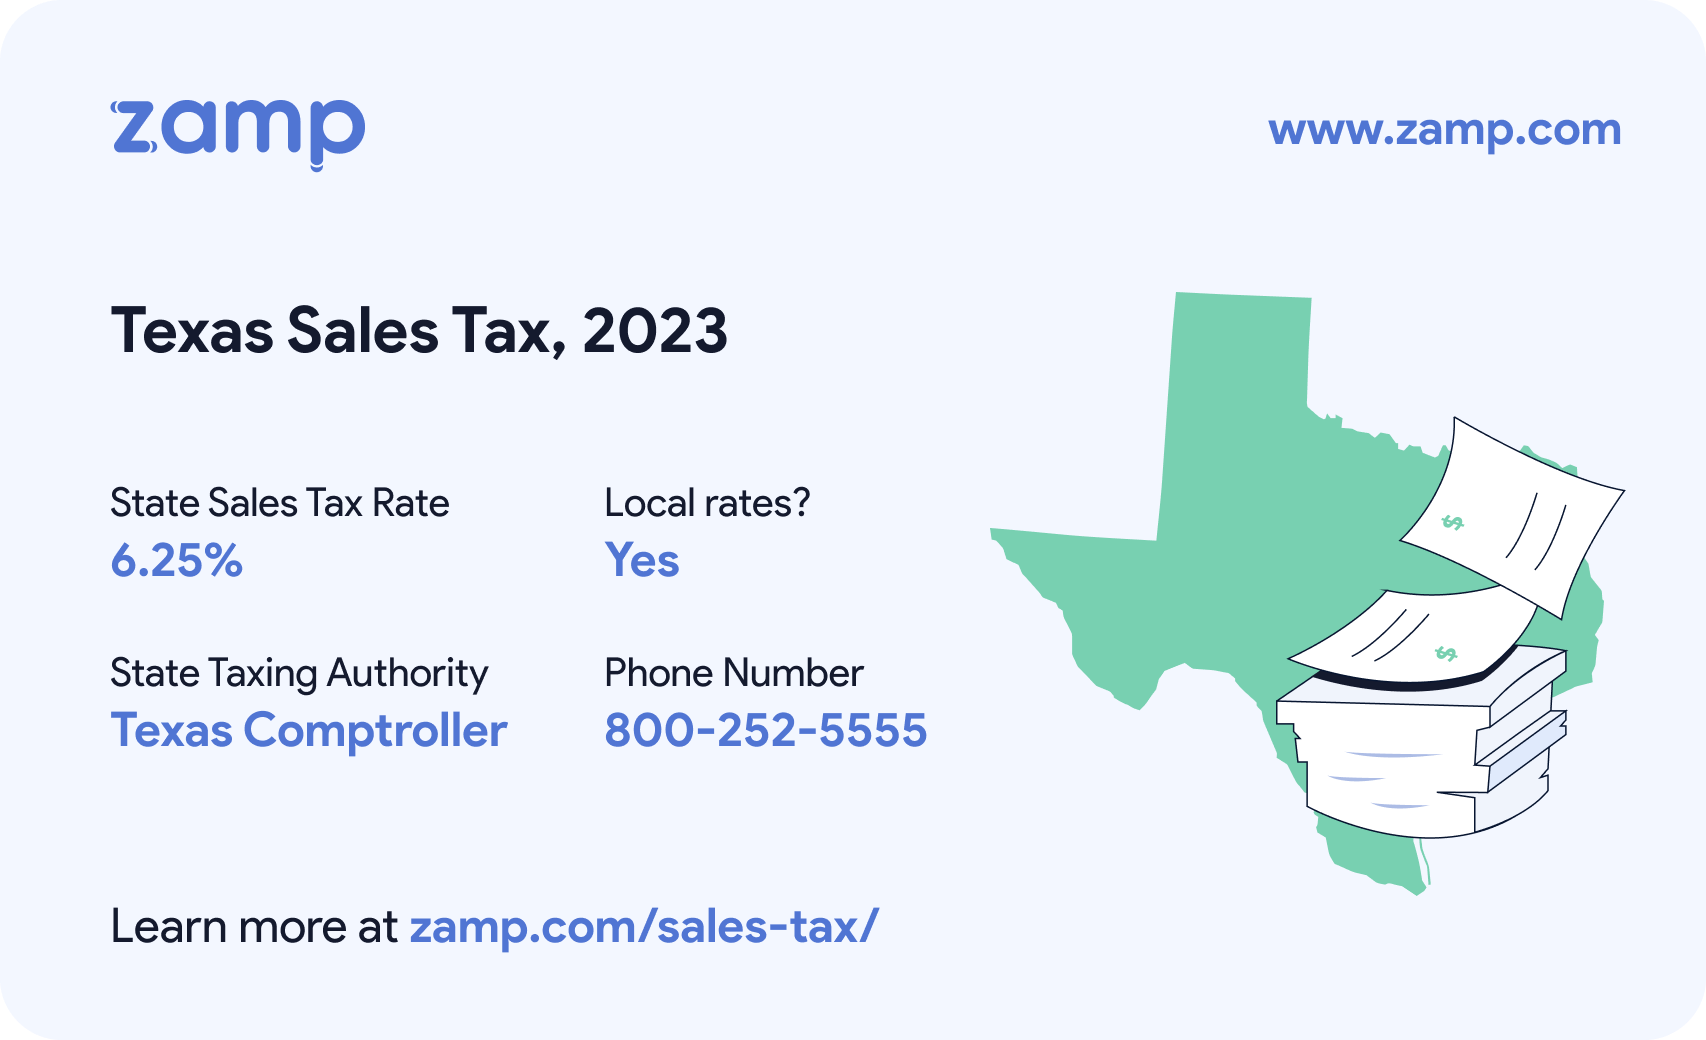 Texas basic sales tax info for 2023 - State sales tax rate: 6.25%, Local rates? Yes; State Taxing Authority: Texas Comptroller; and phone number 800-252-5555